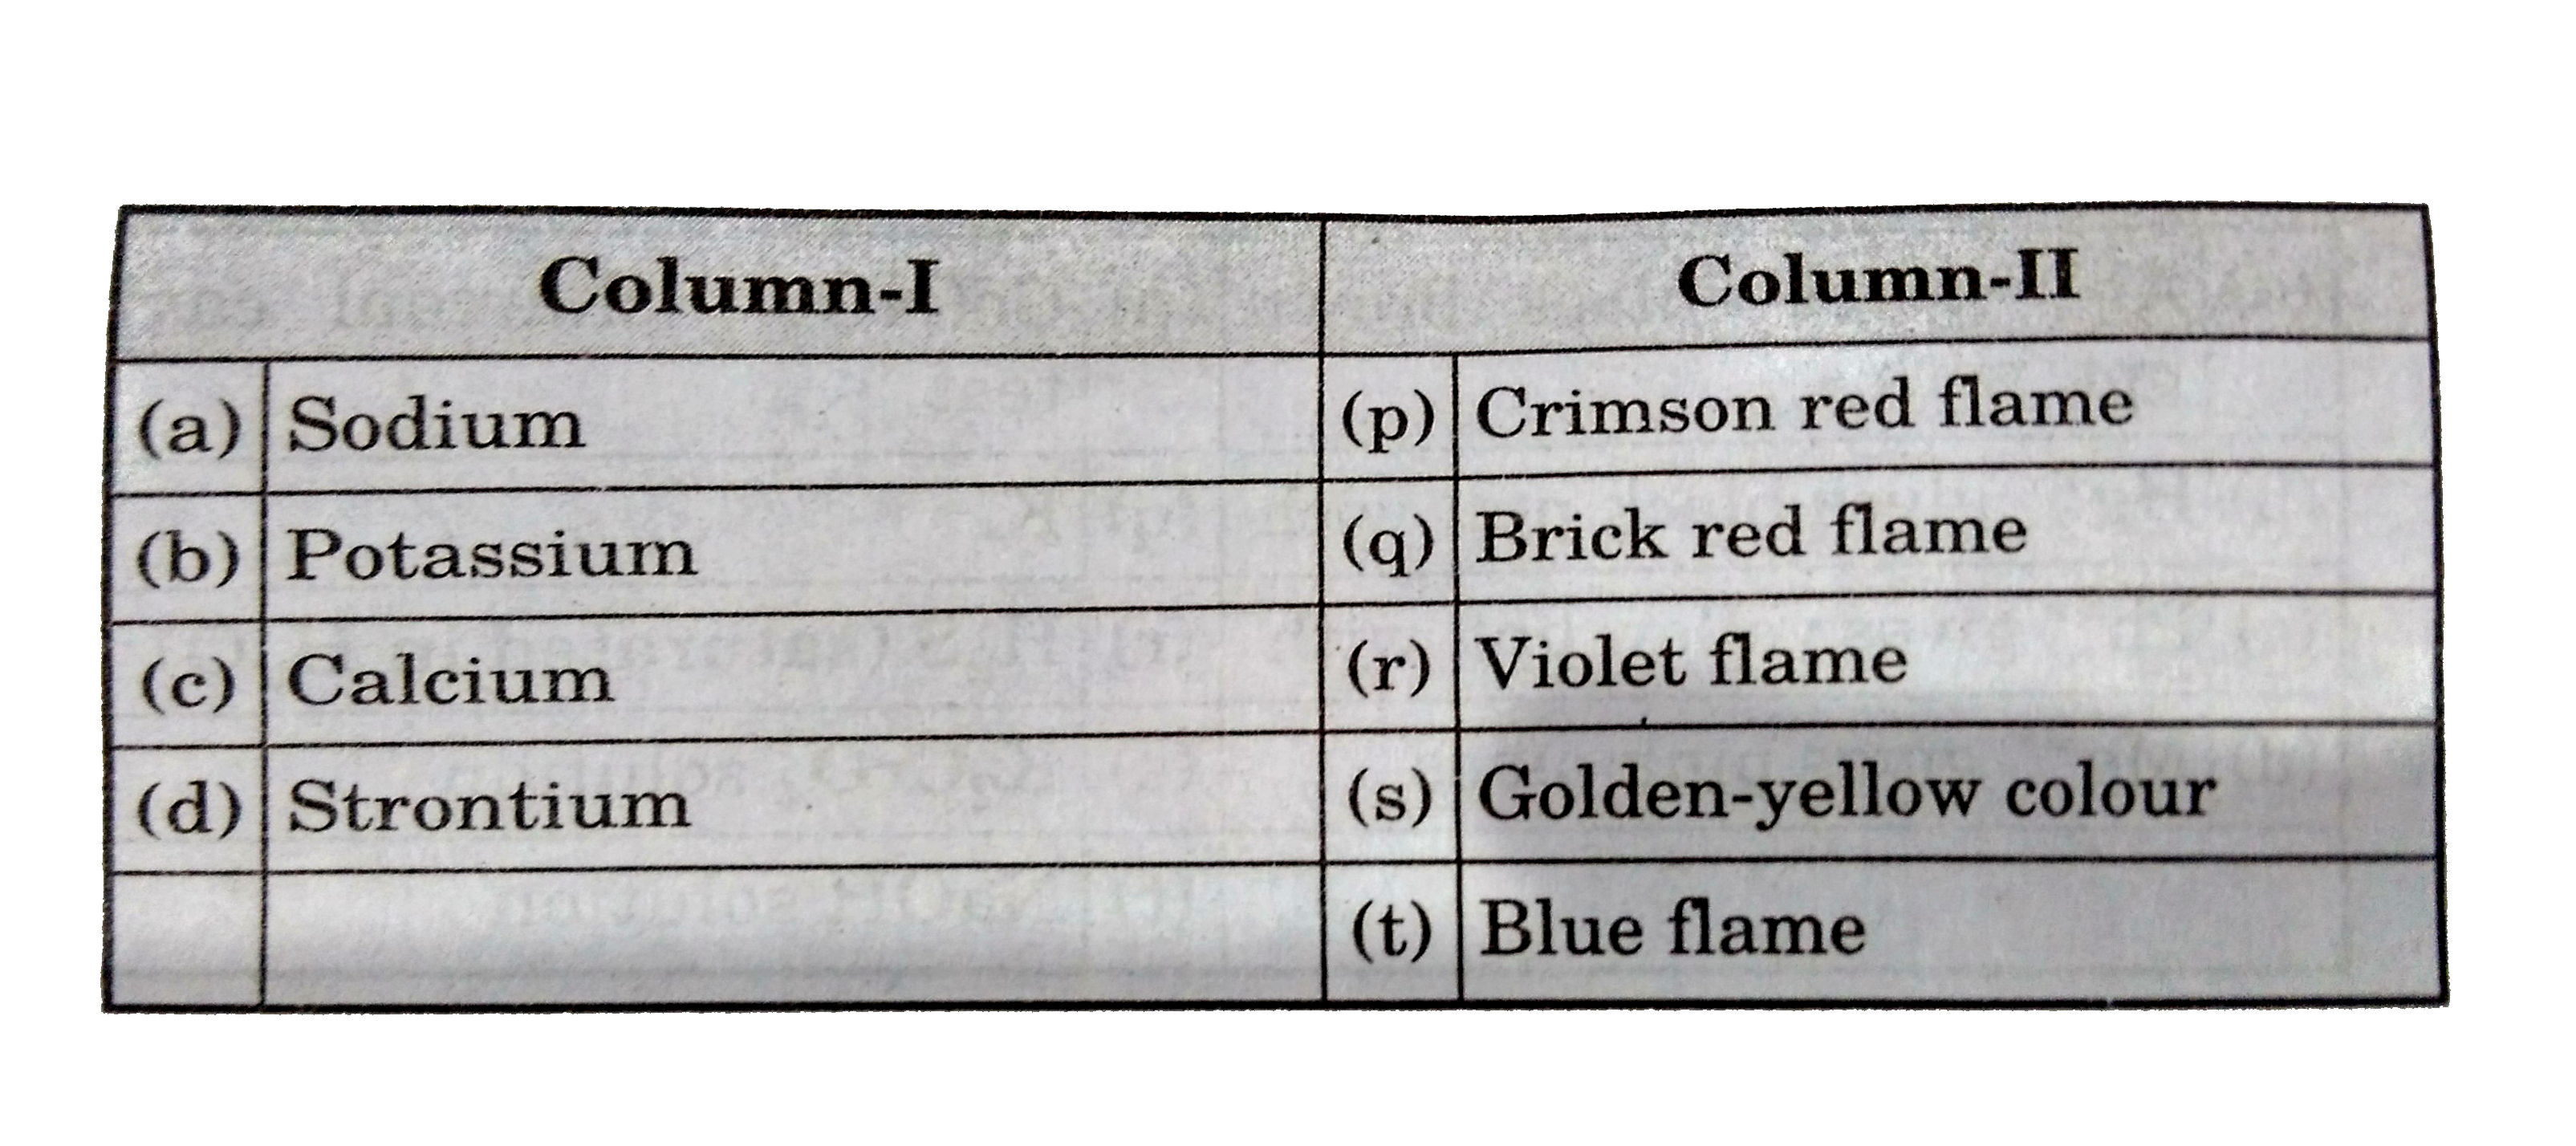 Column-I lists some of elements whose salts give characteristics colour mentioned in column-II. Match eacy entry of column-I with those given in column-II.